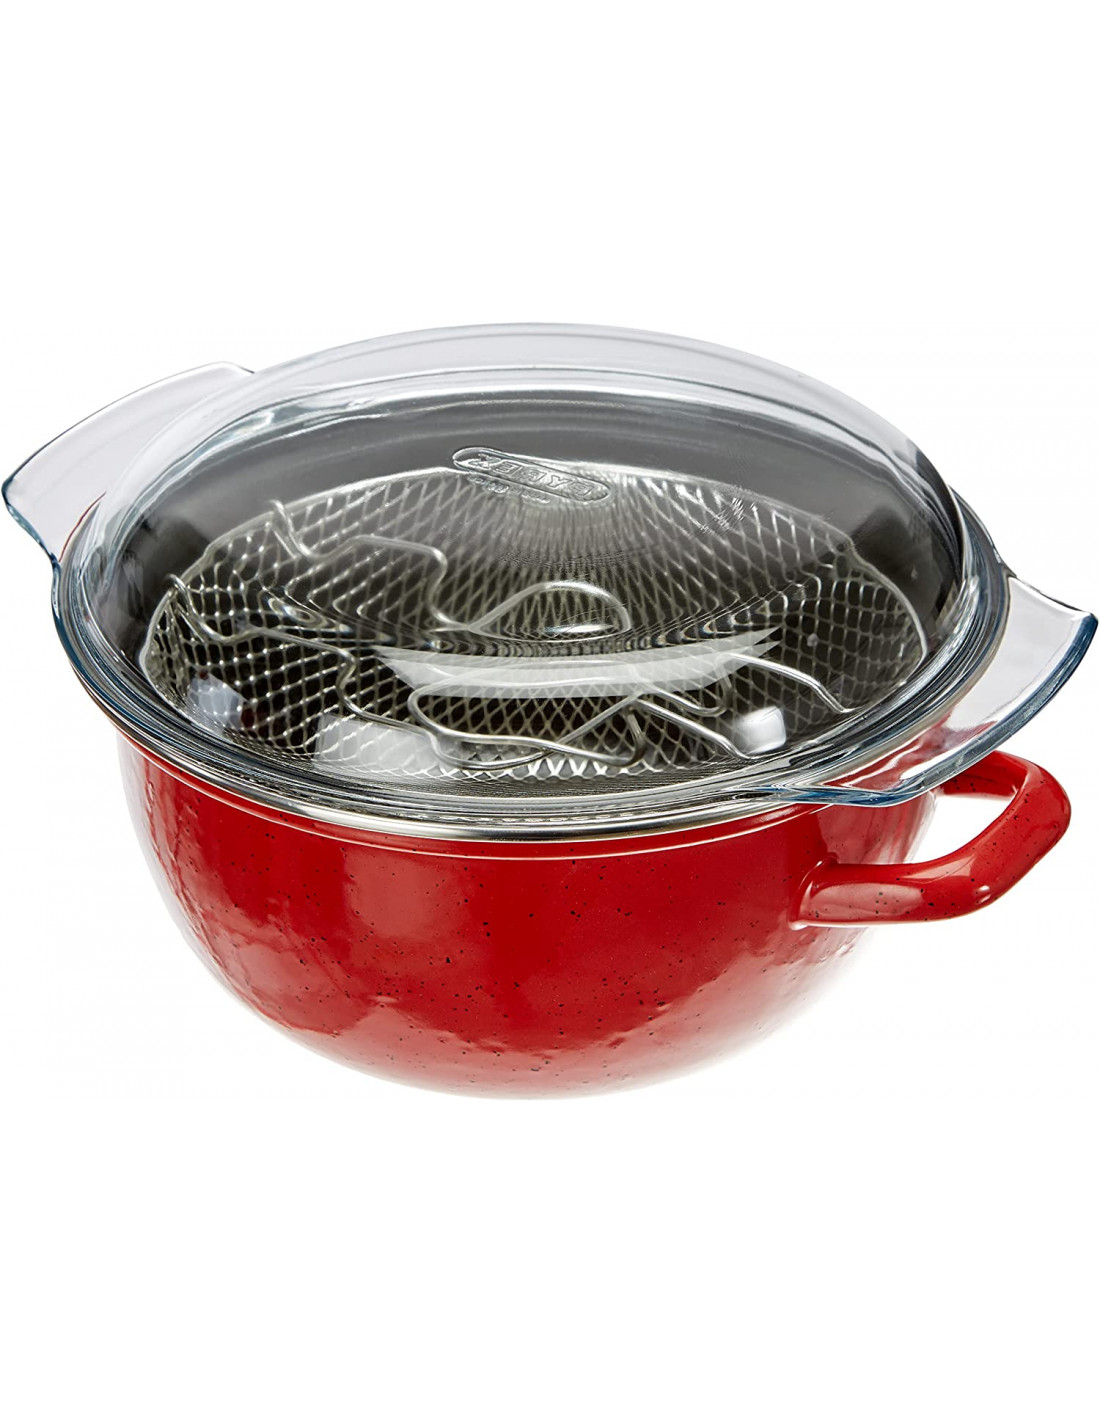 Friteuse inox couvercle grille